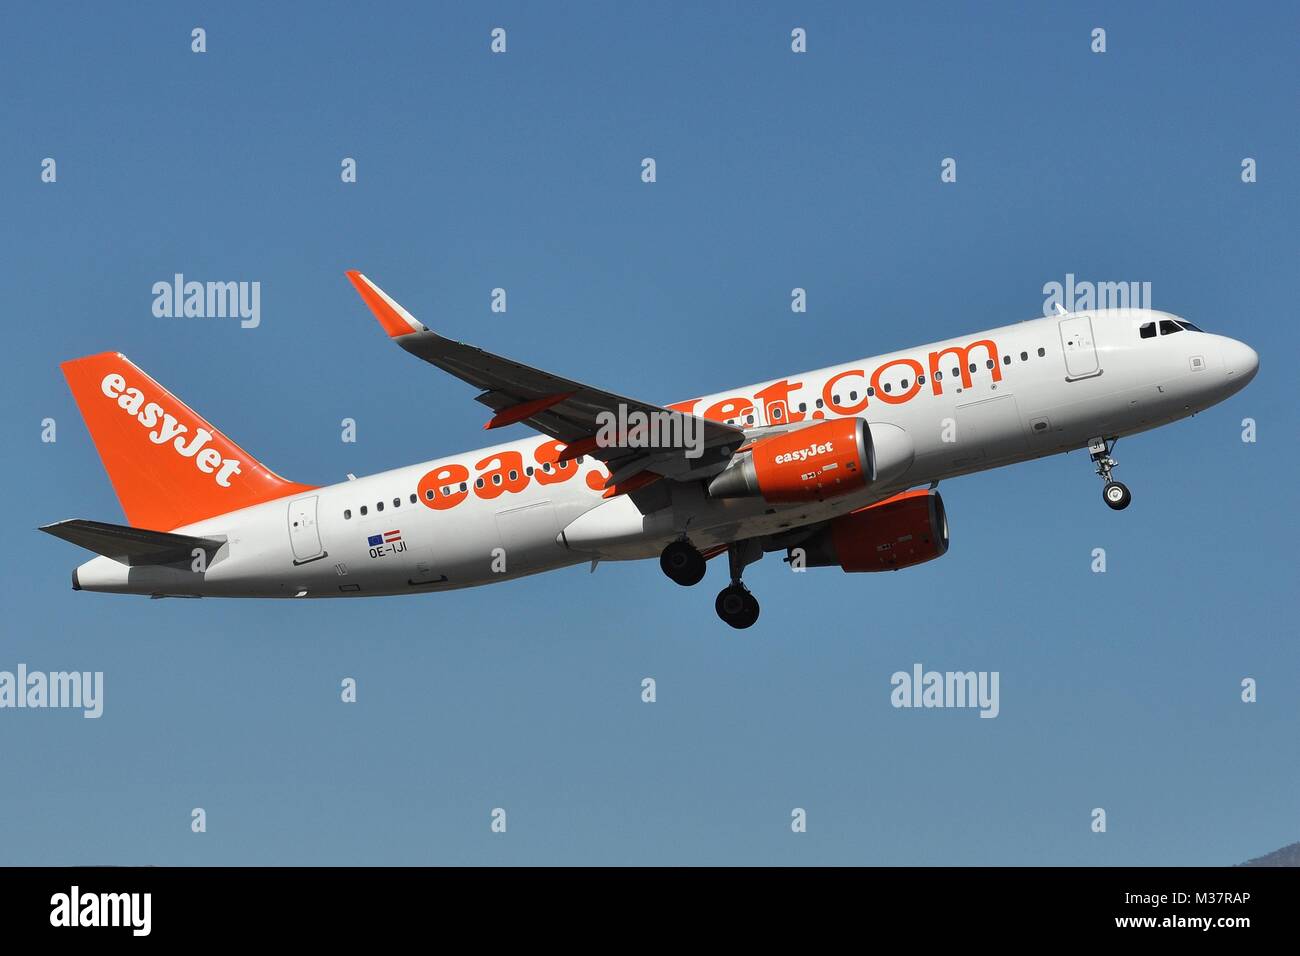 EASYJET EUROPE AIRBUS A320-200(S) OE-IJI ON TAKE-OFF FROM TENERIFE. Stock Photo